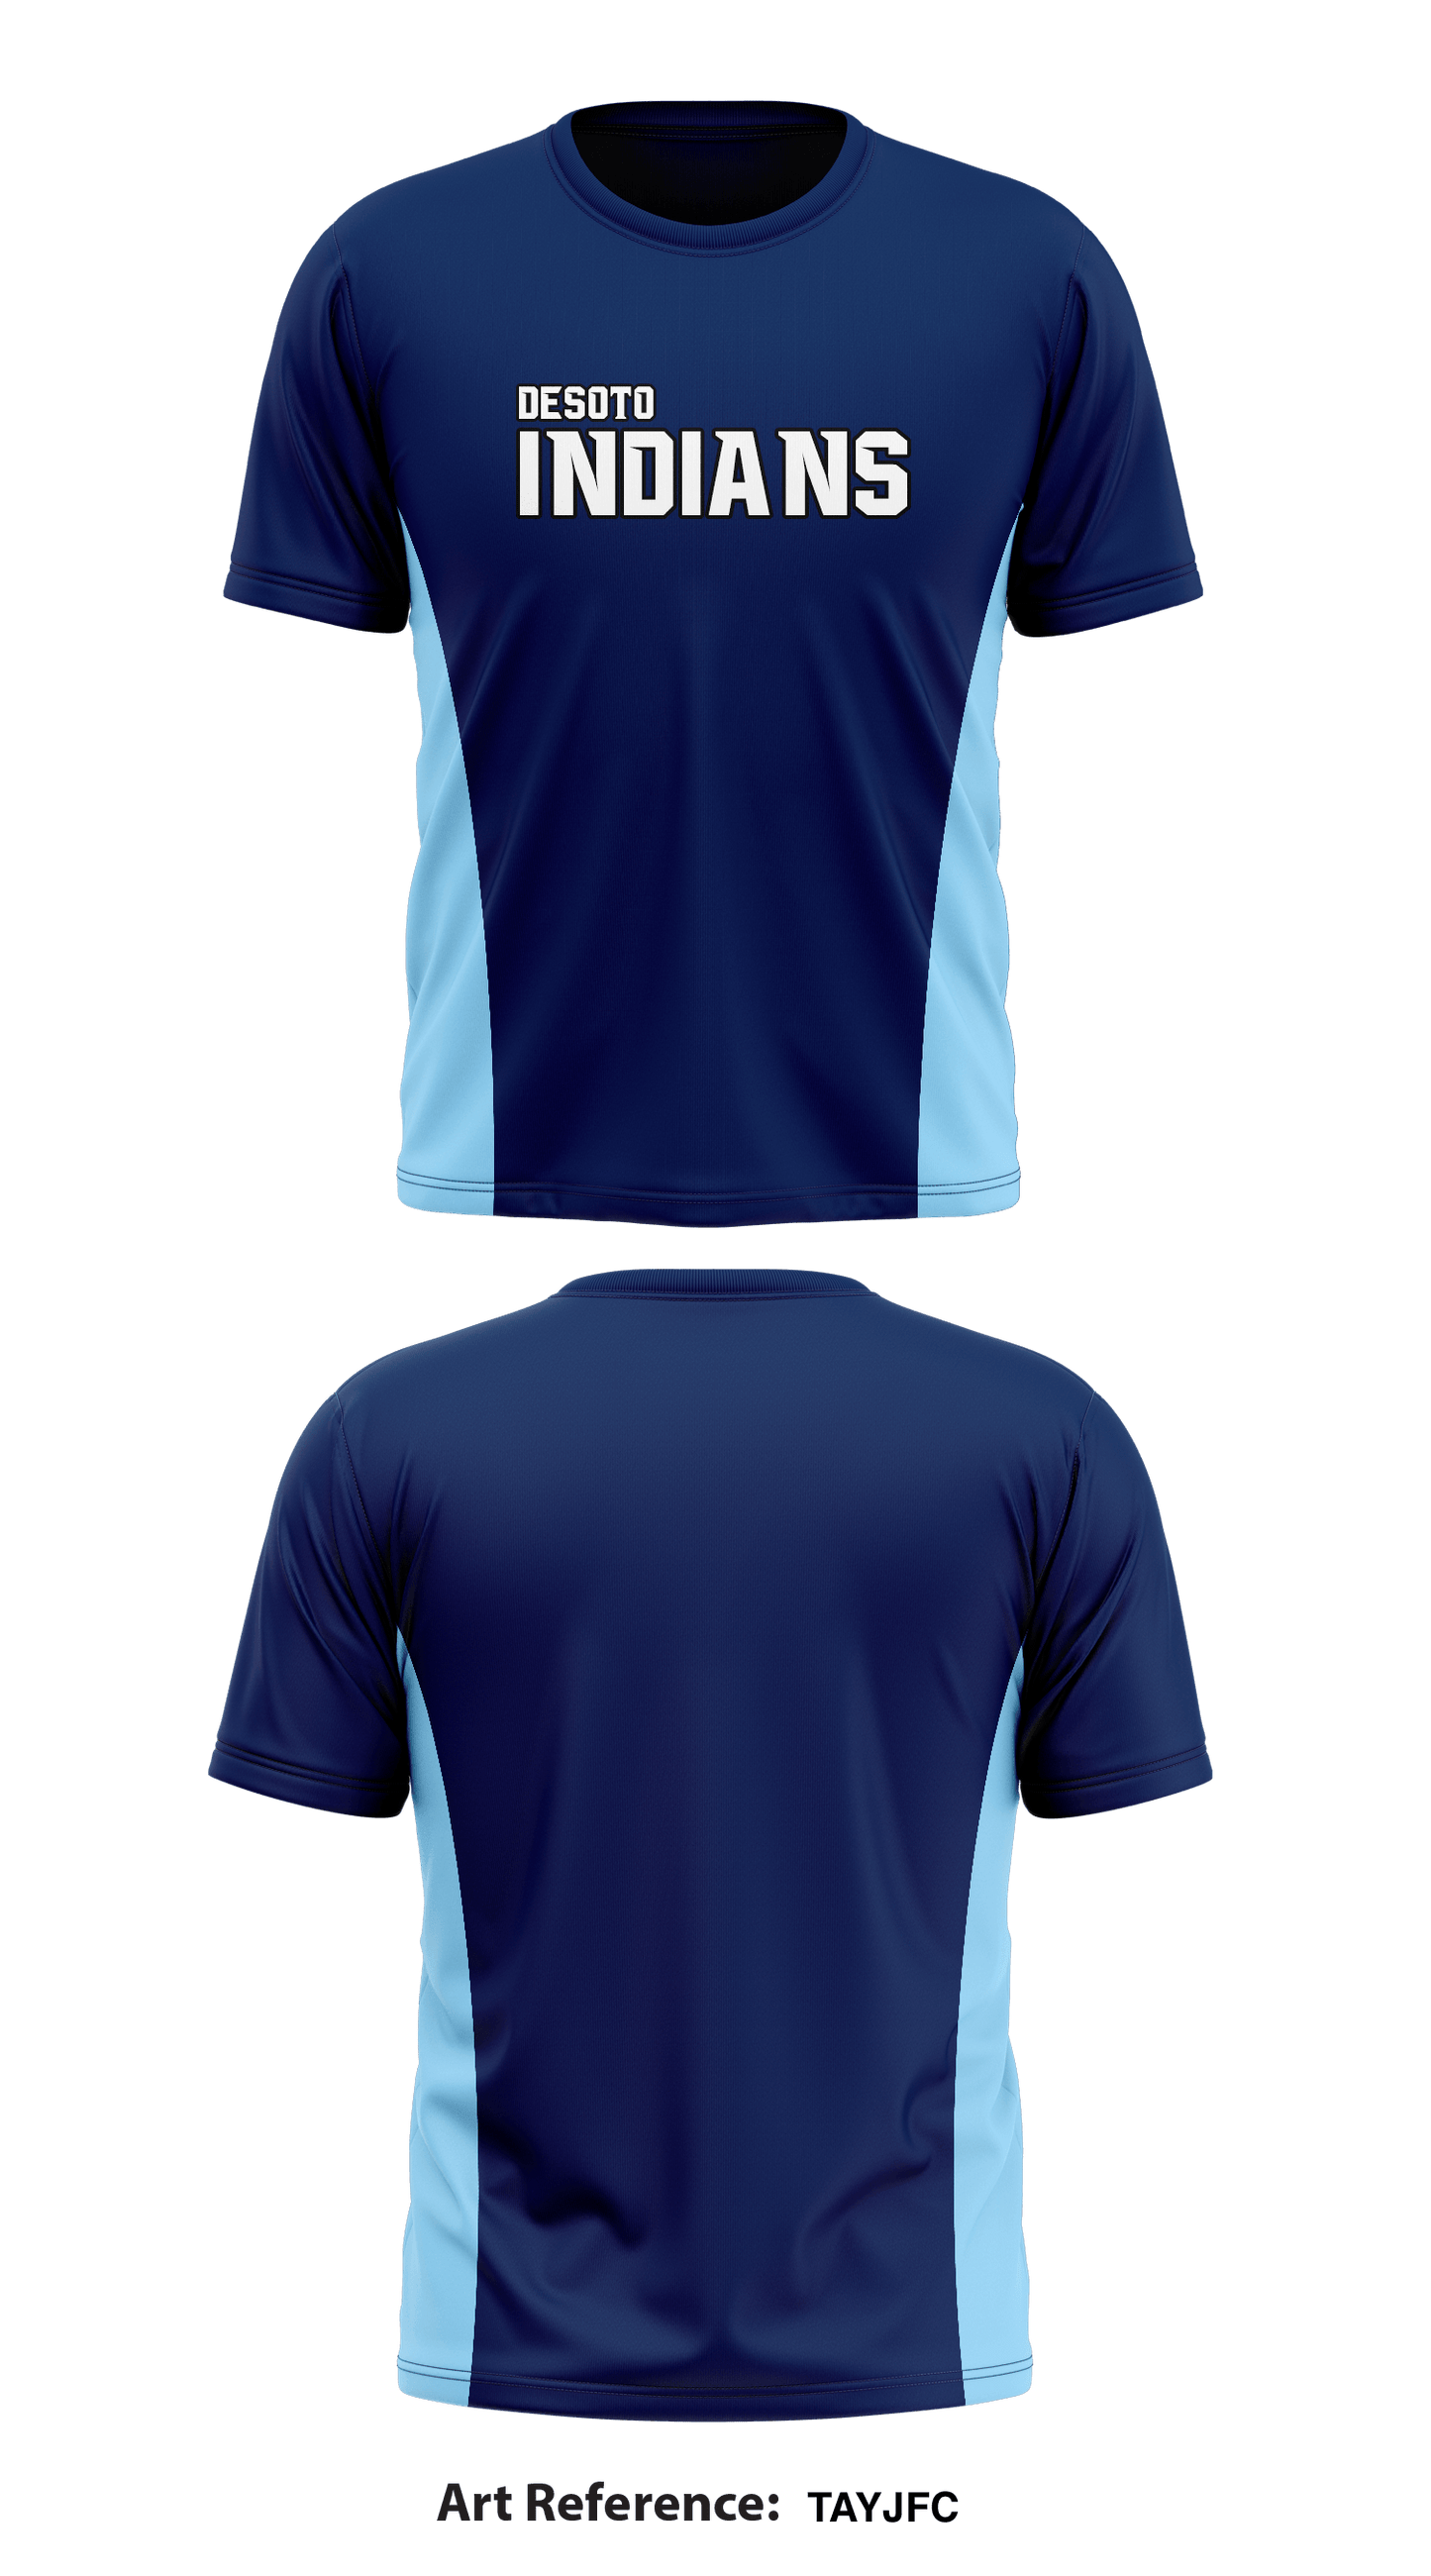 Desoto  Indians  Store 1 Core Men's SS Performance Tee - TAyjFC